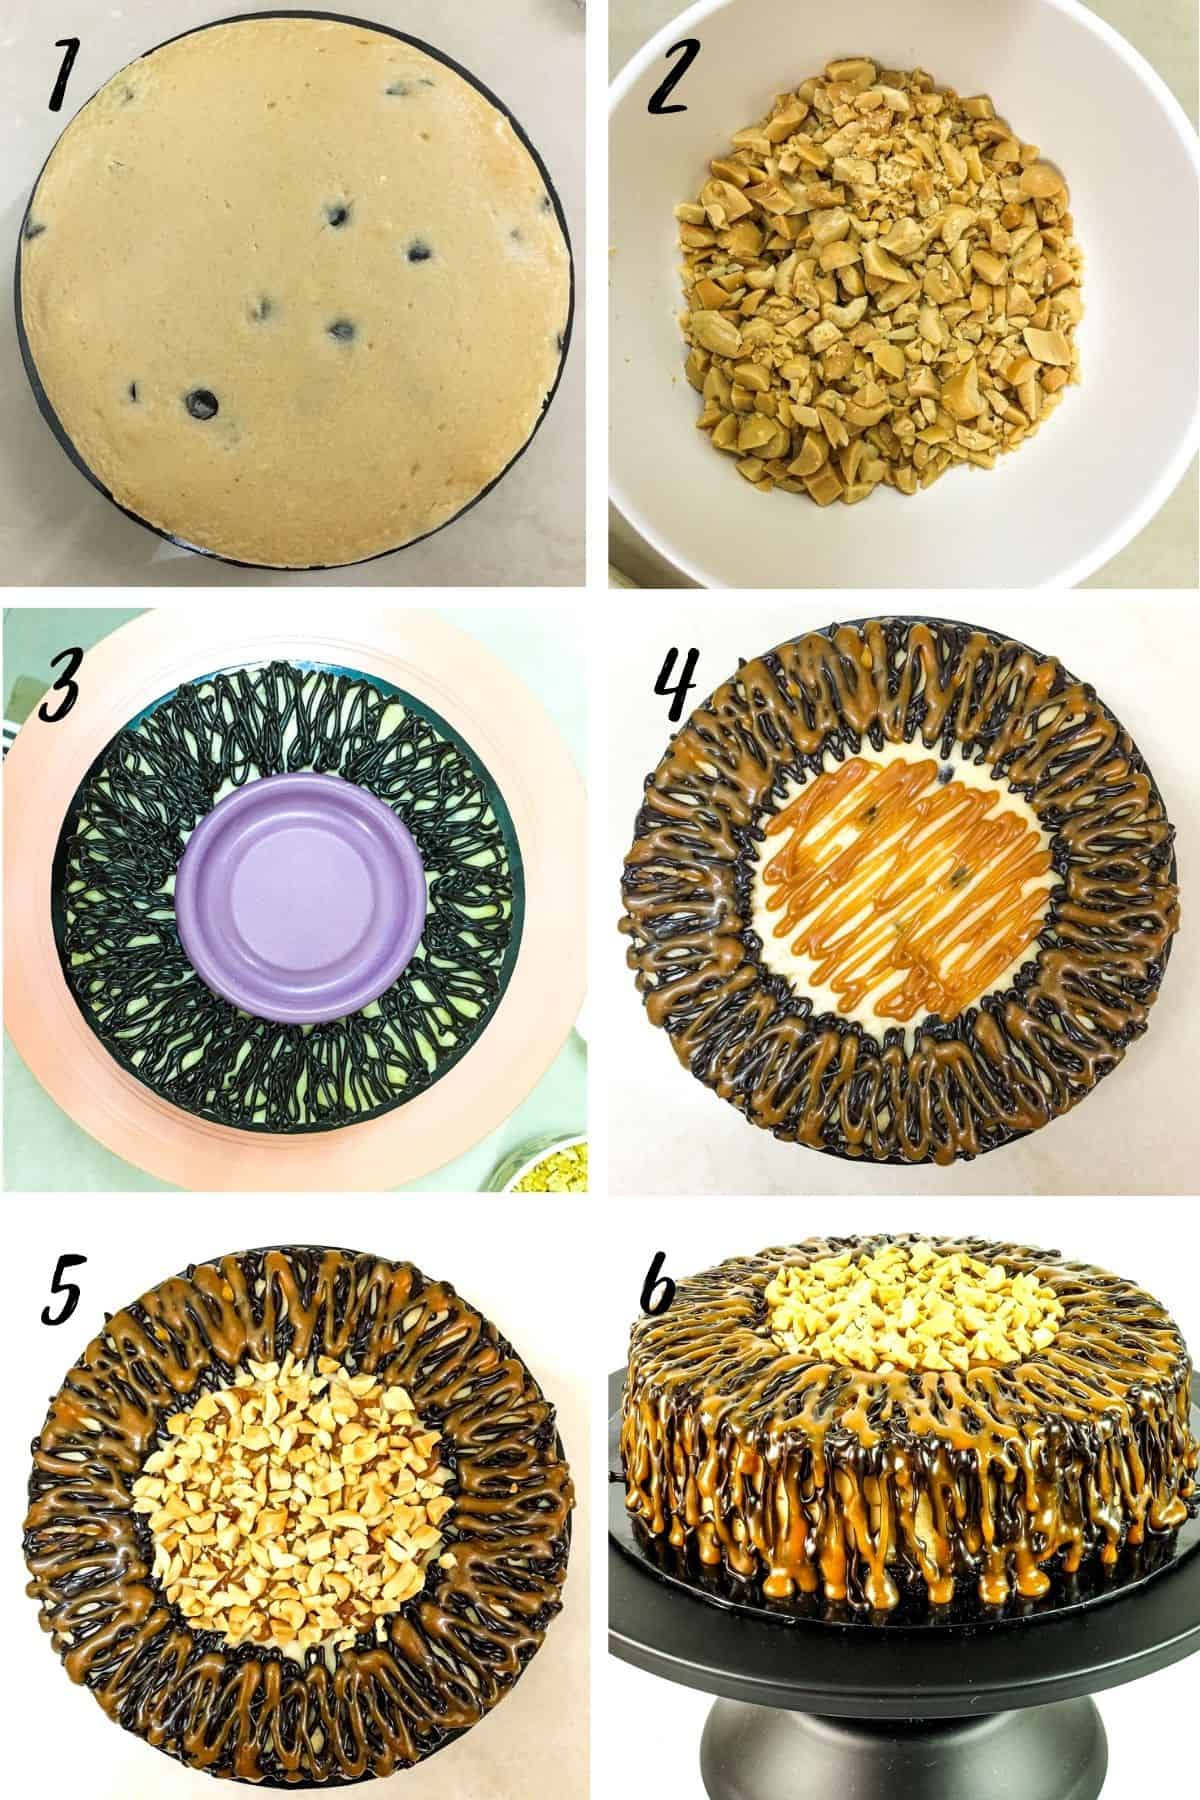 A poster of 6 images showing how to decorate a cheesecake with chopped peanuts and chocolate and caramel drizzle.